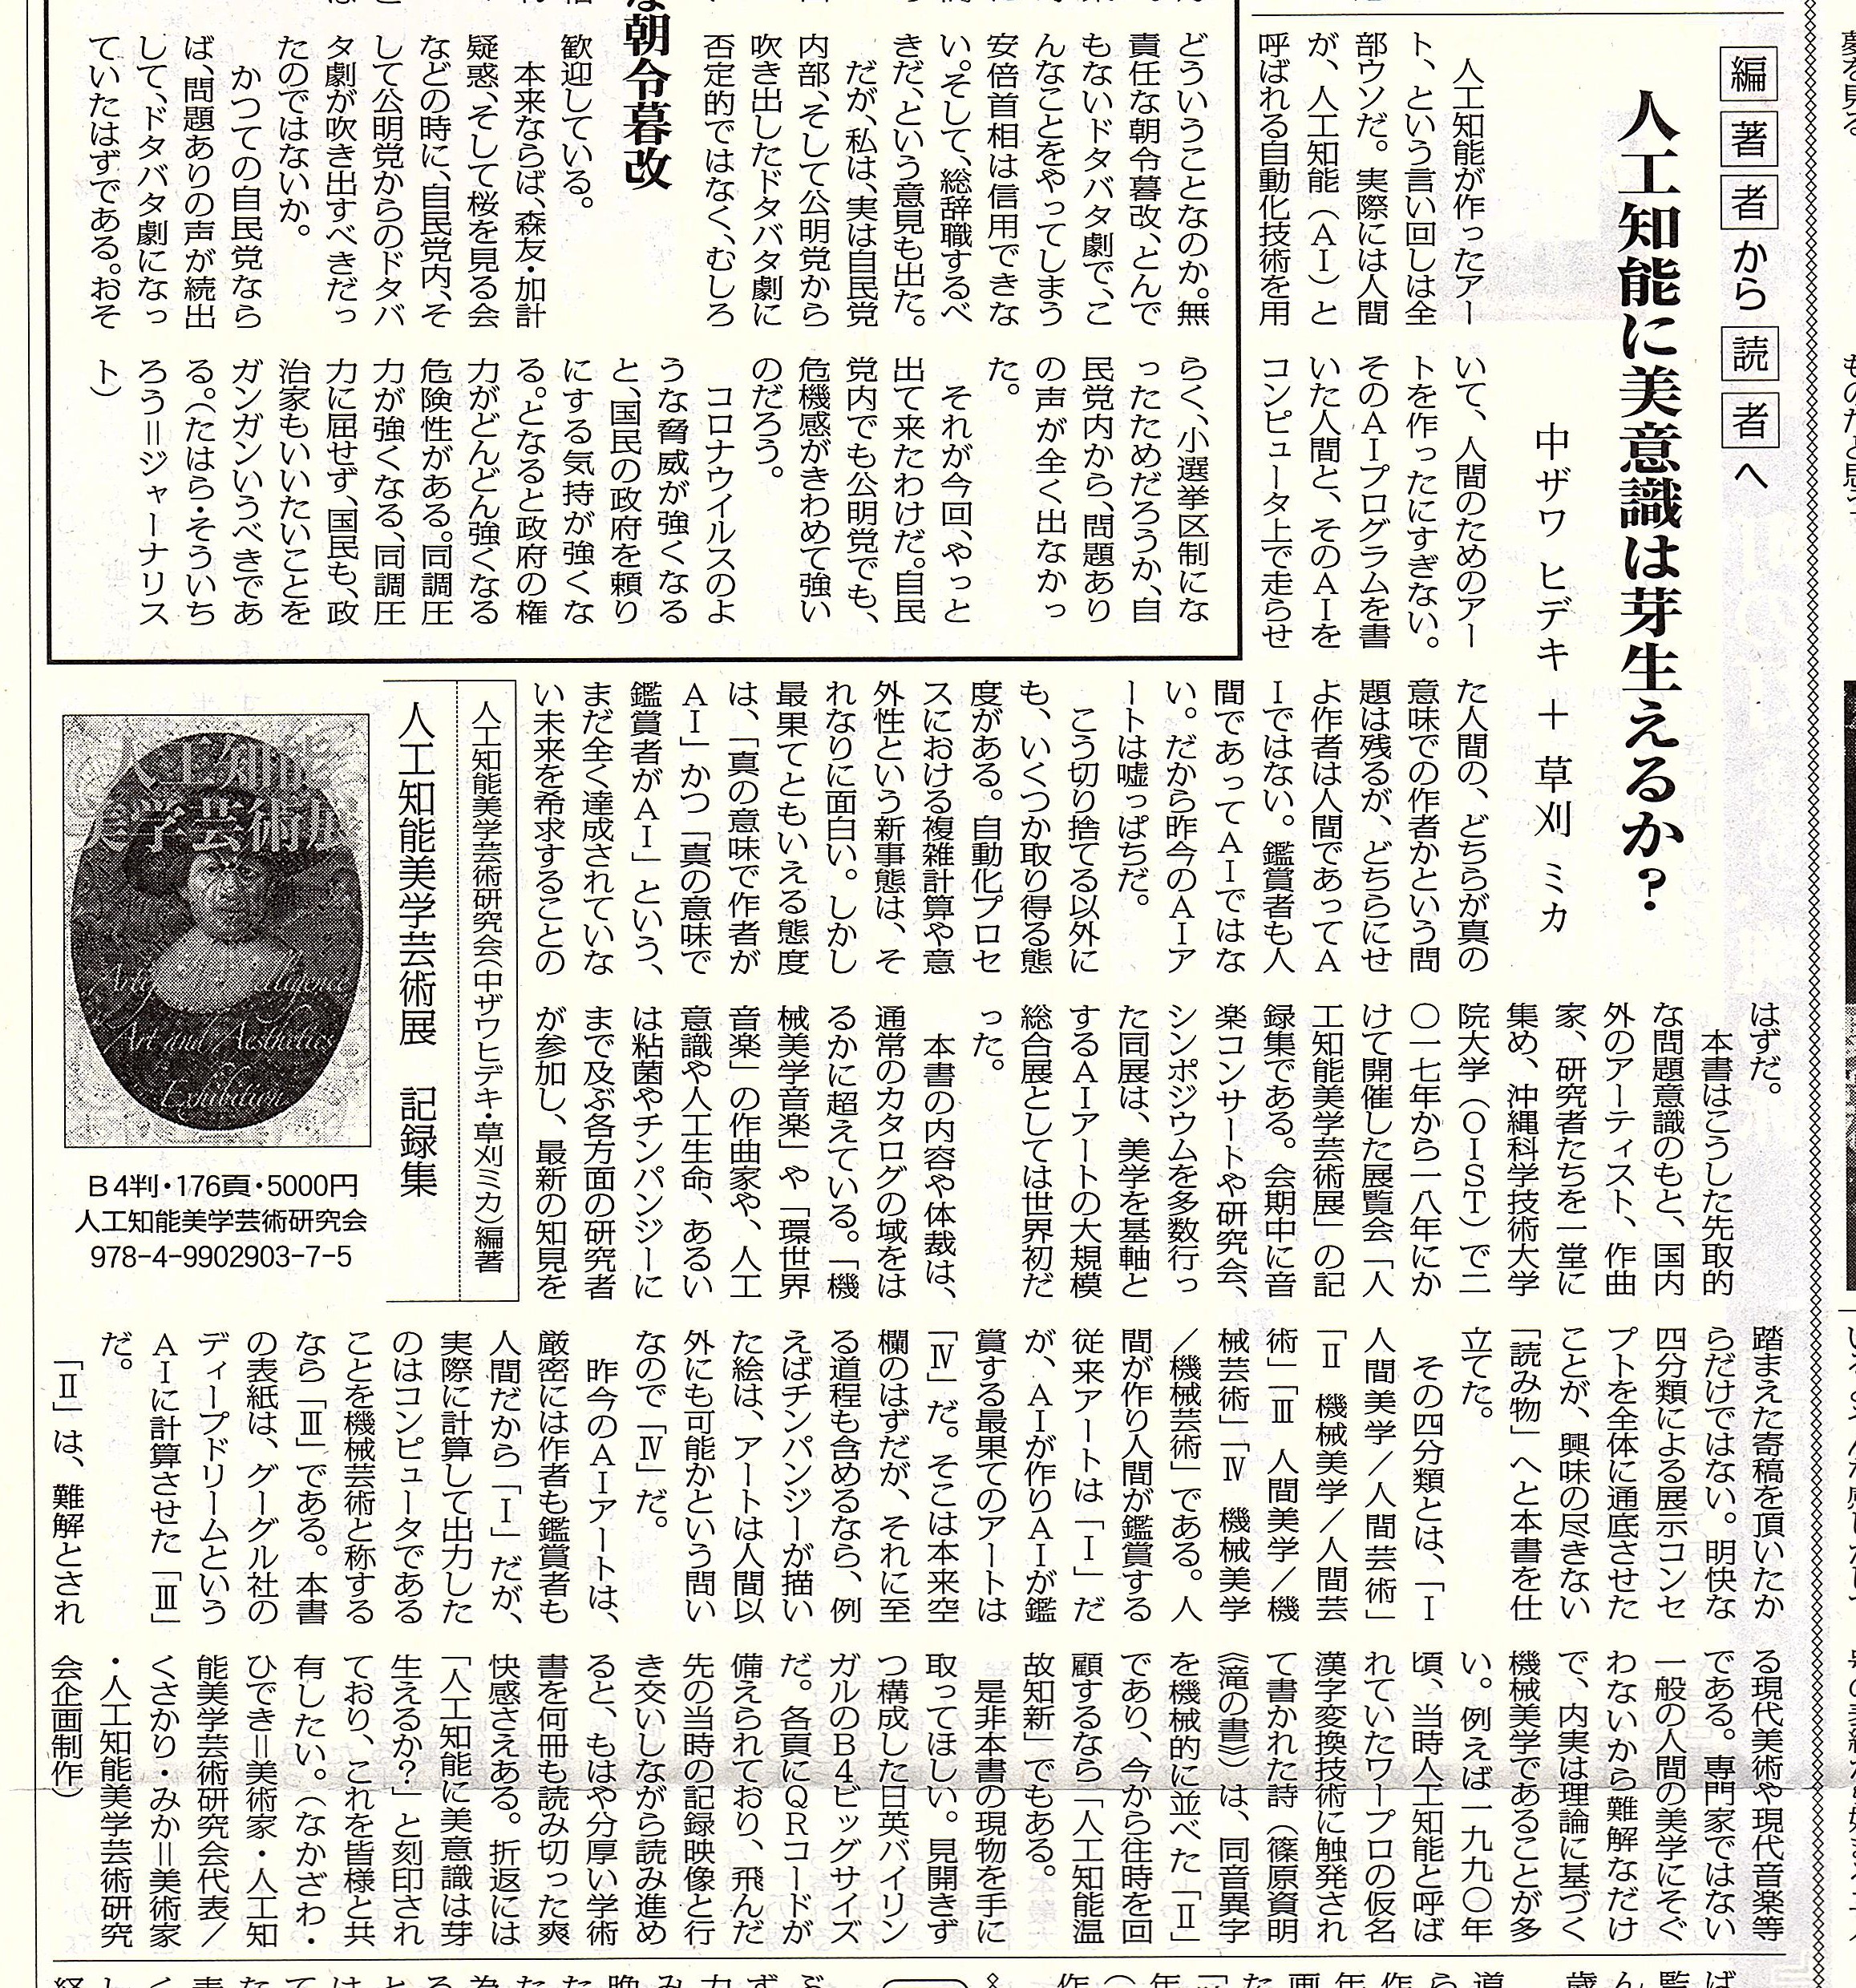 “Will AI Develop Its Own Sense of Aesthetics?” From Author and Editor to Reader (Weekly Dokushojin)